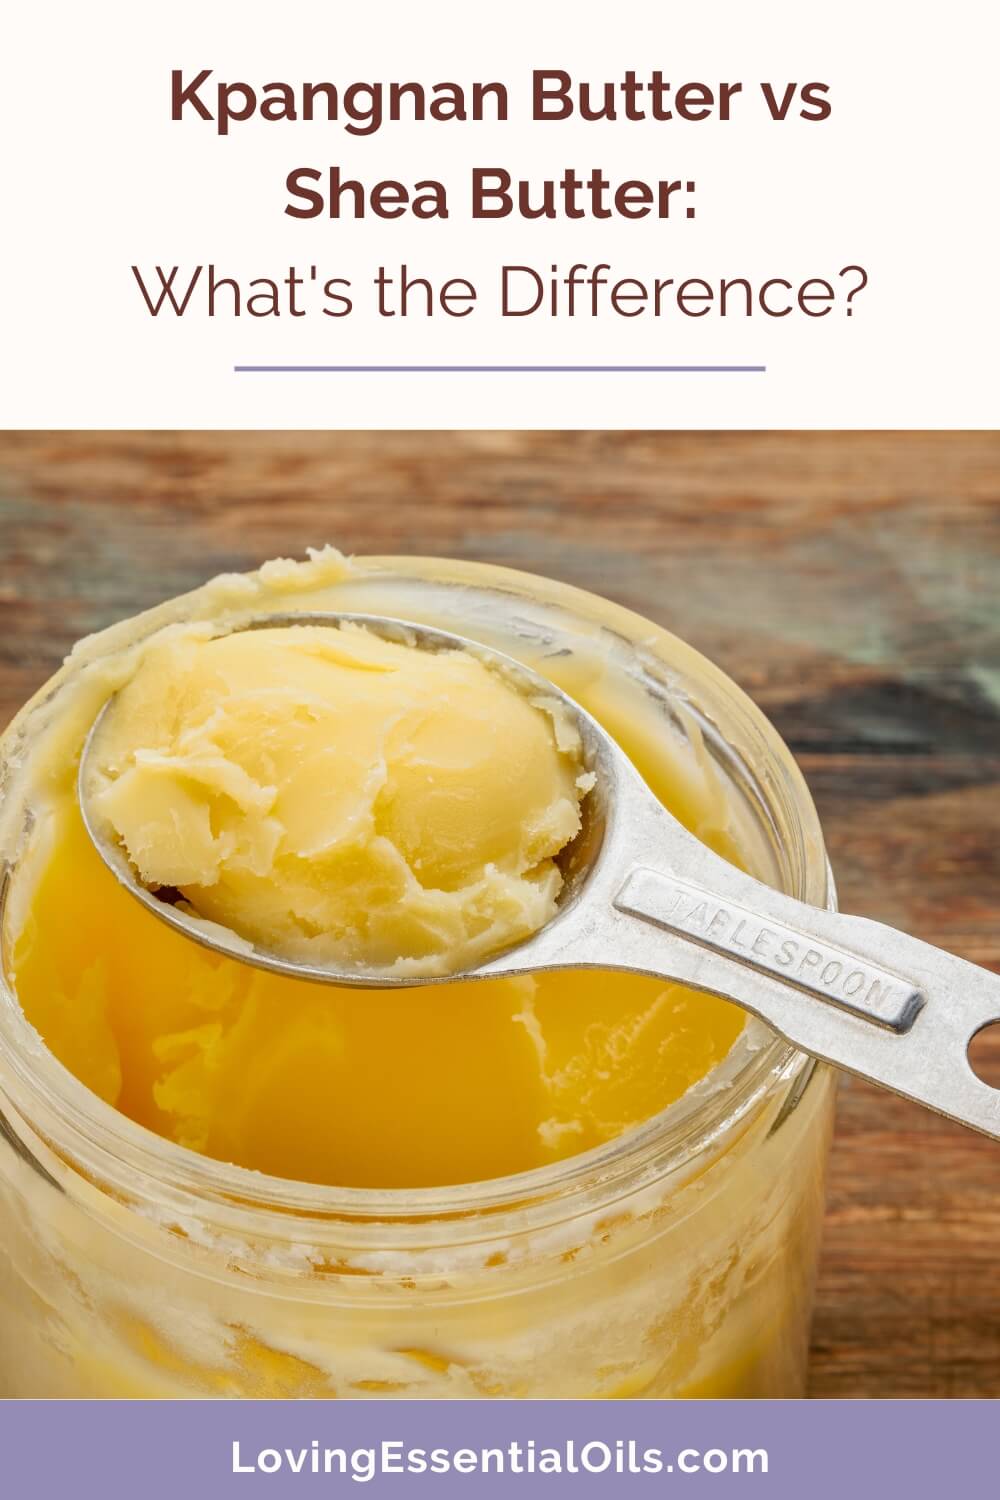 Kpangnan Butter vs Shea Butter: What's the Difference? by Loving Essential Oils